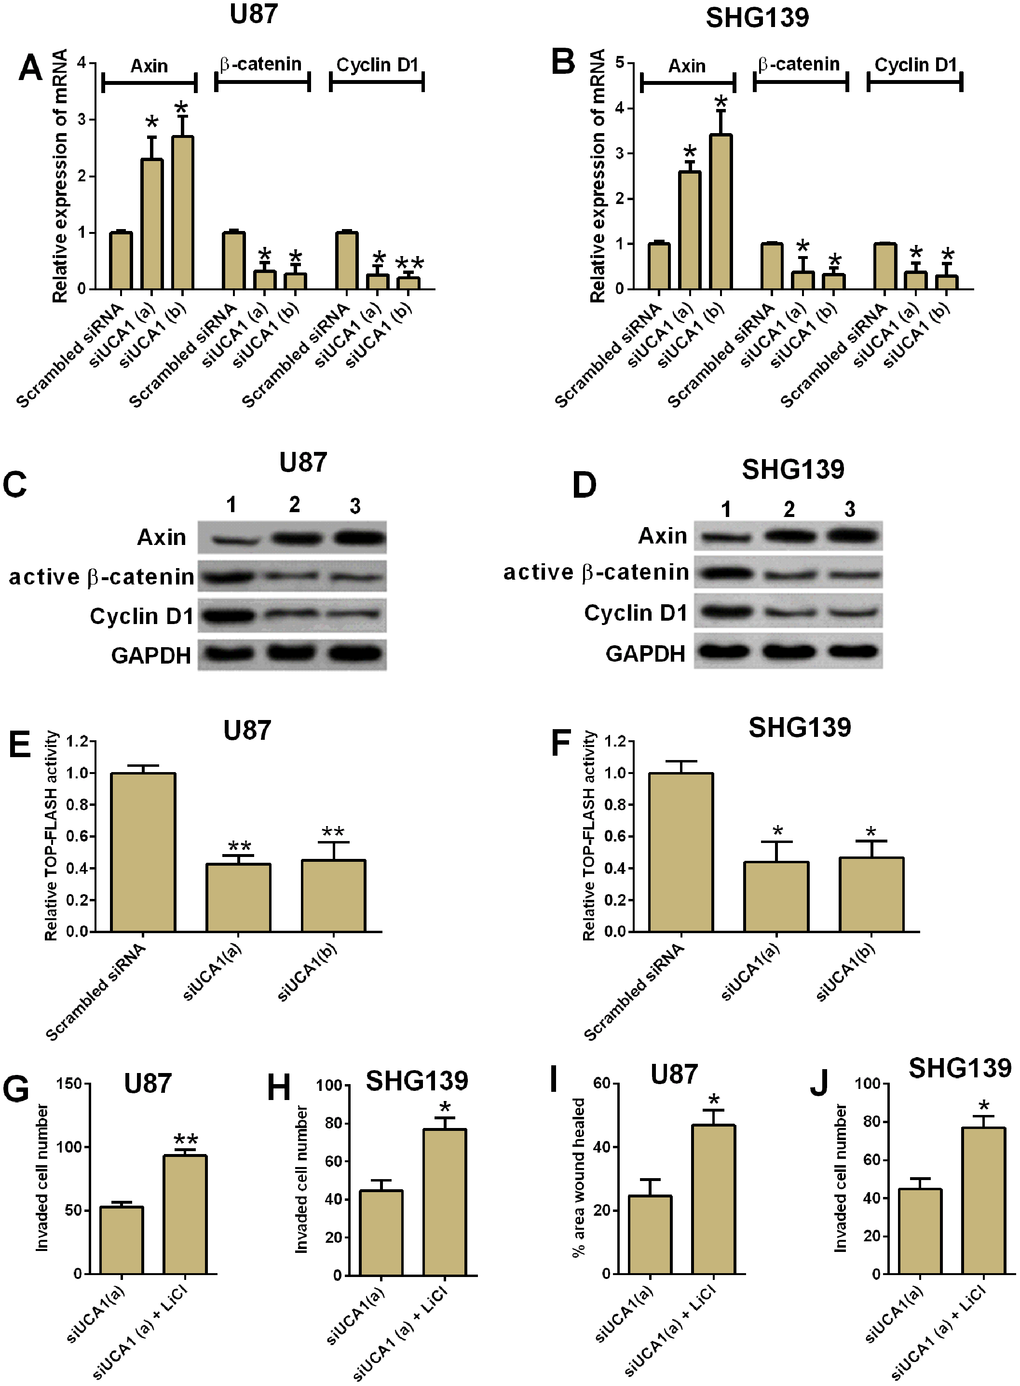 UCA1 regulated glioma cell invasion and migration via Wnt/β-cateinin signaling pathway. The mRNA expression of axin, β-cateinin and cyclin D1 in (A) U87 and (B) SHG139 cells after UCA1 siRNAs (siUCA1(a) and siUCA1(b)) or scrambled siRNA transfection were determined by qRT-PCR. The protein expression levels of Axin, active β-cateinin and cyclin D1 in (C) U87 and (D) SHG139 cells after UCA1 siRNAs (siUCA1(a) and siUCA1(b)) or scrambled siRNA transfection were determined by western blotting assay. The TOP-FLASH activity of (E) U87 and (F) SHG139 cells after UCA1 siRNAs (siUCA1(a) and siUCA1(b)) or scrambled siRNA transfection were determined by TOP-FLASH assay. The cell invasive potential in (G) U87 and (H) SHG139 cells after treatment with siUCA1(a) or siUCA1(a) + LiCl was determined by cell invasion assay. The cell migratory potential in (I) U87 and (J) SHG139 cells after treatment with siUCA1(a) or siUCA1(a) + LiCl was determined by cell migration assay. 1, scrambled siRNA; 2, siUCA1(a); 3, siUCA1(b). All the experiments were performed in triplicates. Significant differences compared to the control group were expressed as *P